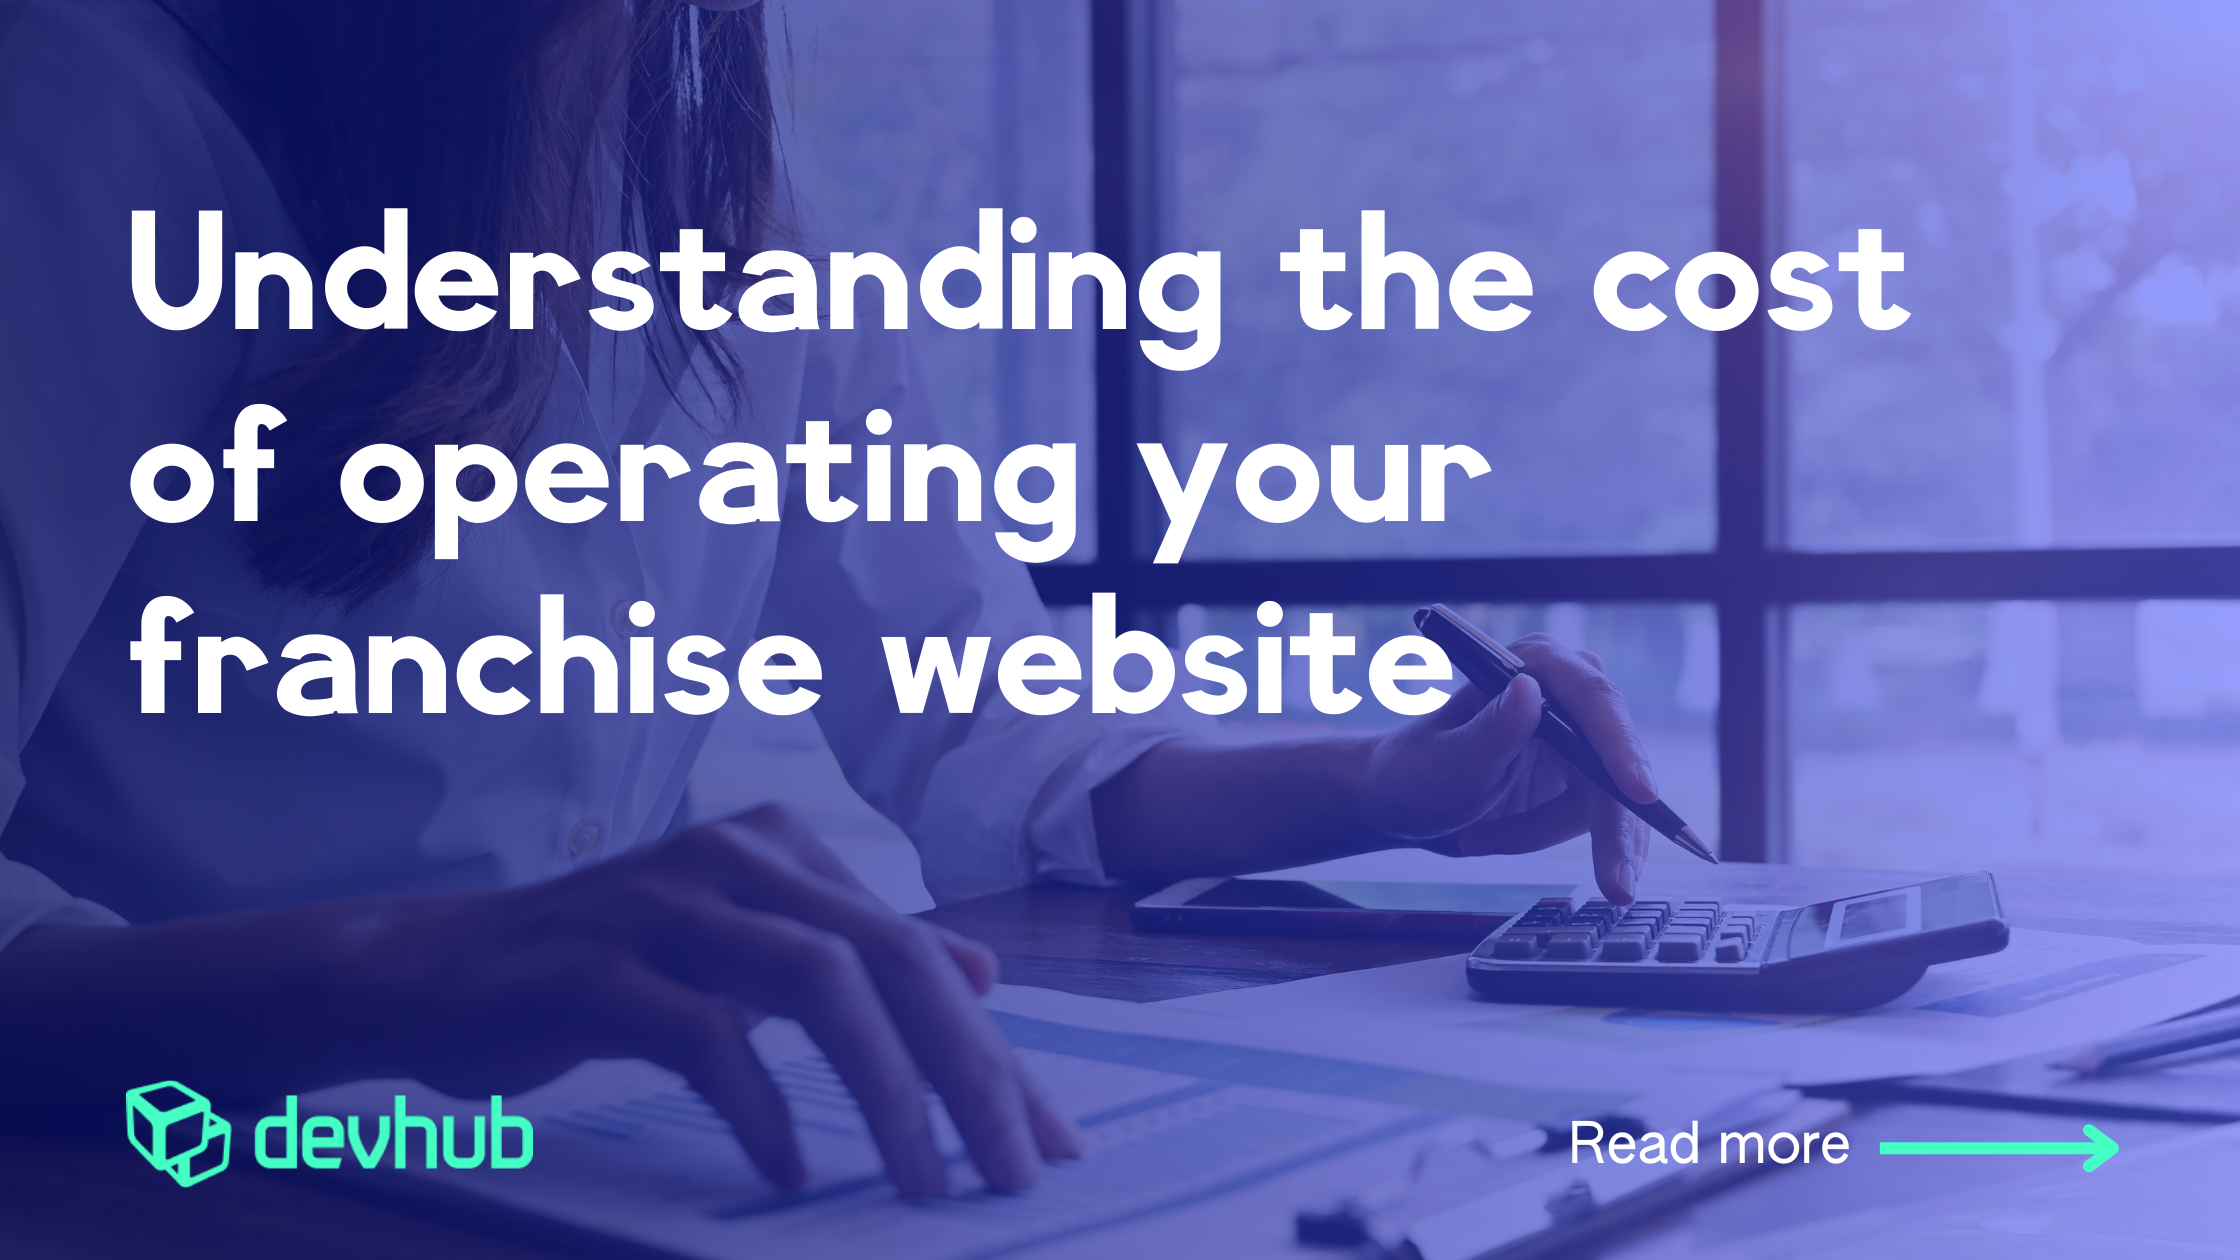 Understanding the cost of operating your franchise website